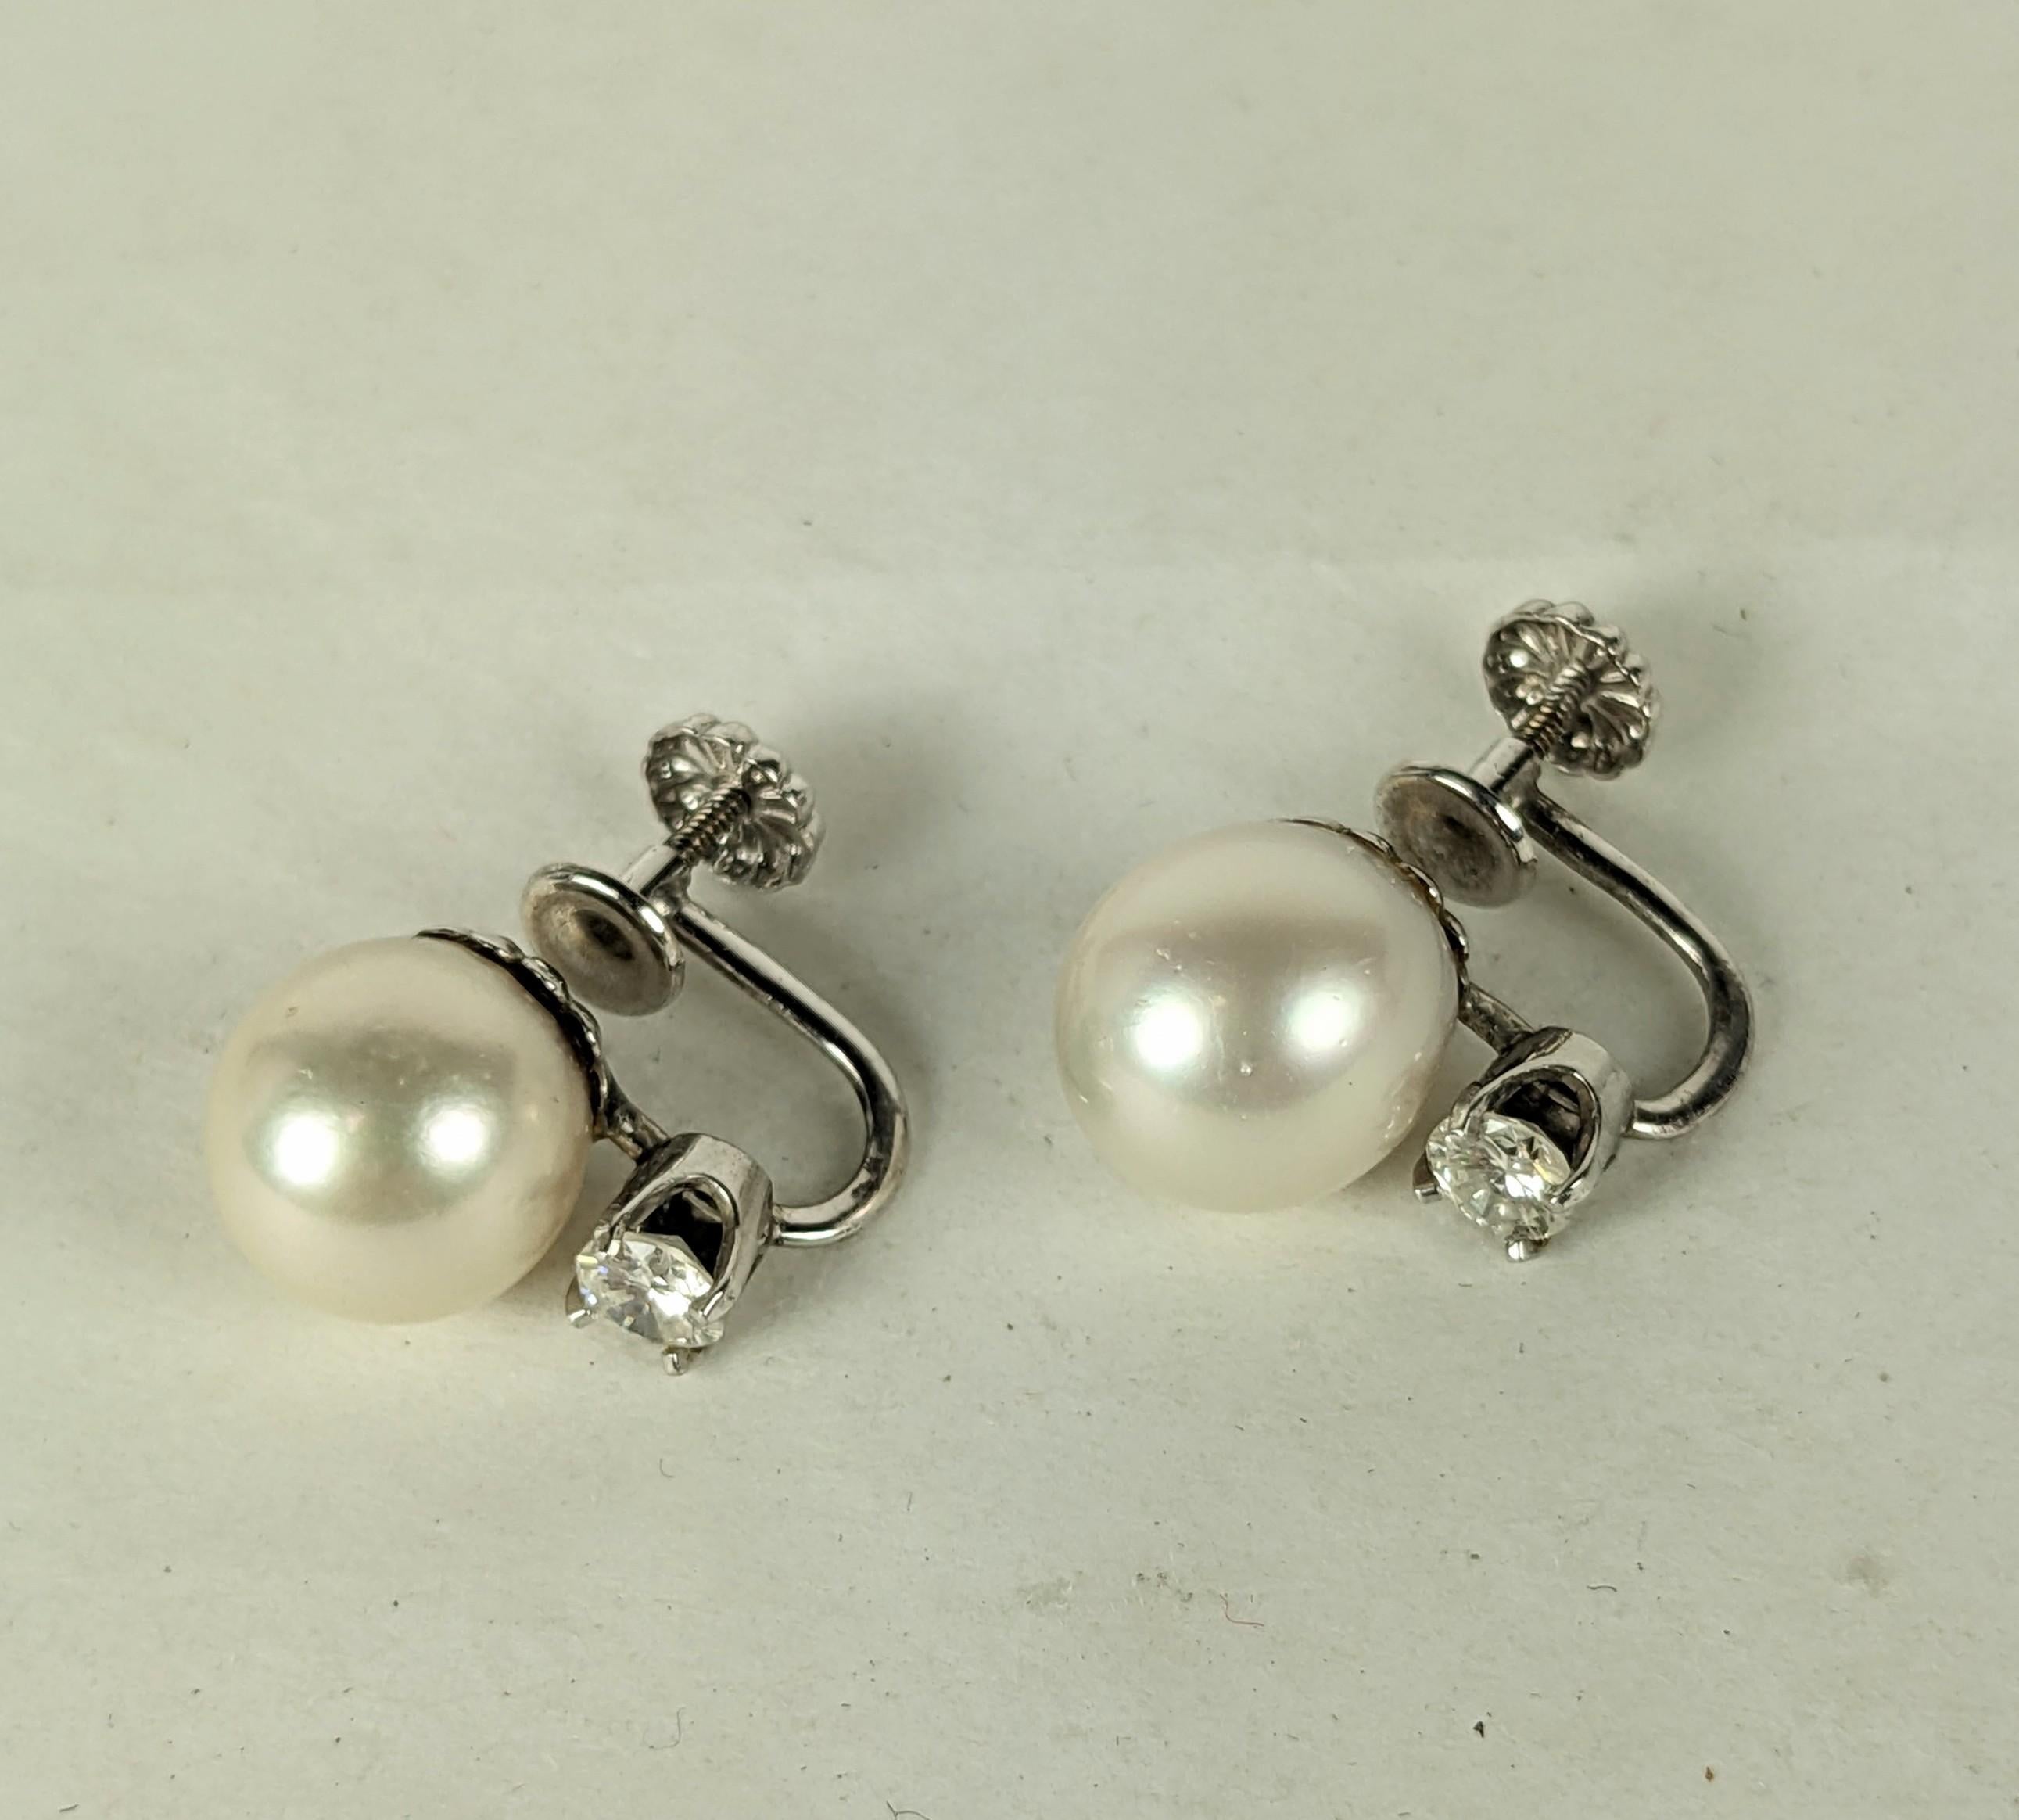 Classic Cultured Pearl and Diamond Earrings from the 1950's. Set in 14k White gold with screwback fittings and large 10mm creamy white cultured pearls and .25 carat diamonds under each pearl. .50 carat total diamonds. 1950's USA. 